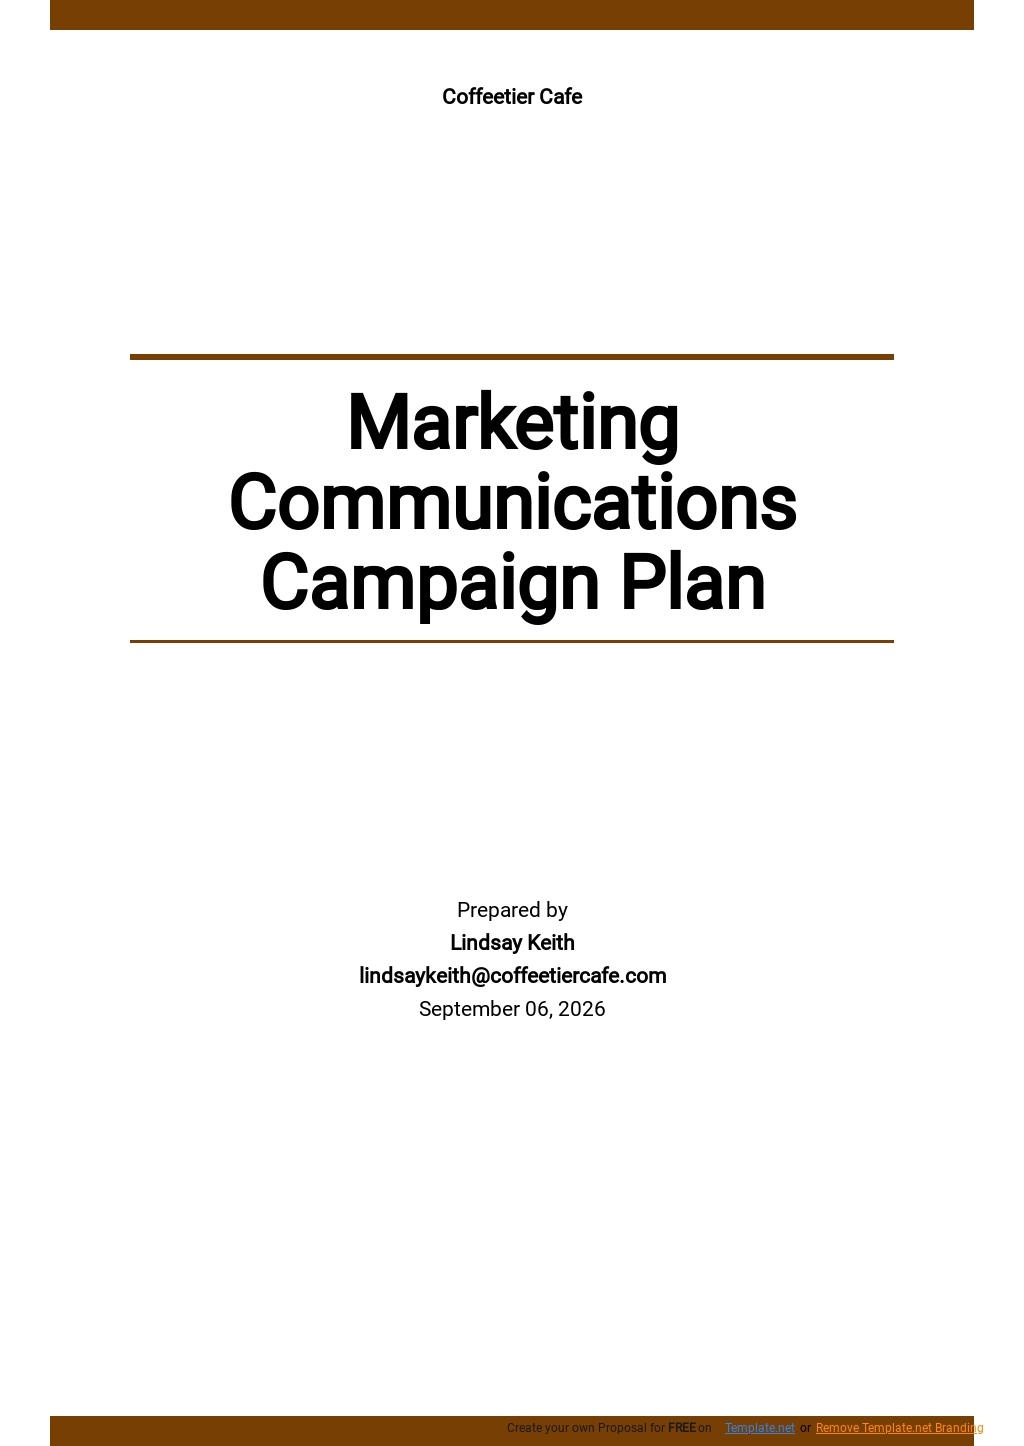 Marketing Communications Campaign Plan Template